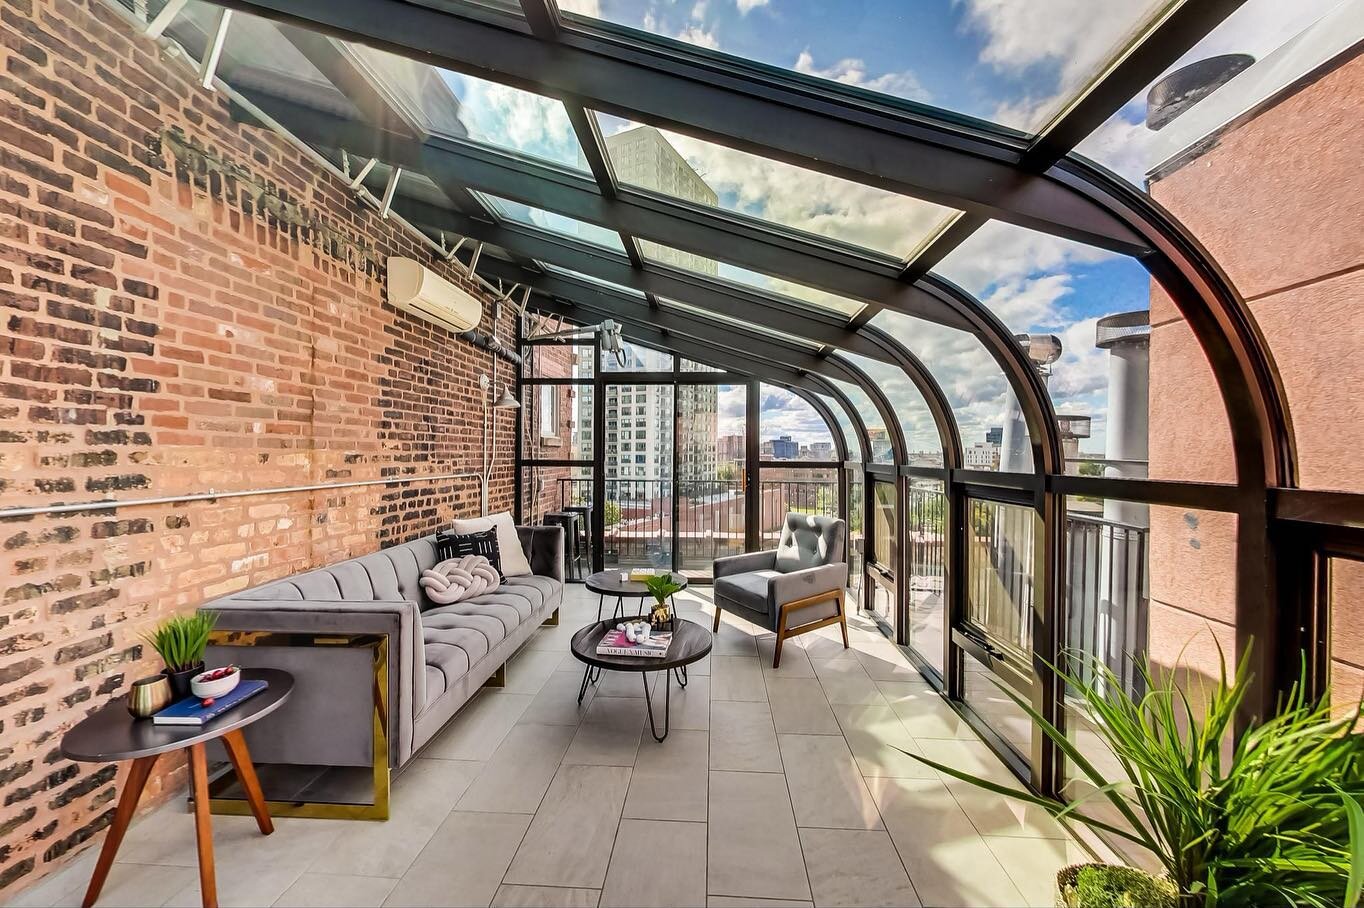 Have you always wanted to live in a chic urban penthouse along the river with a private glass sunroom? And a deck overlooking the Chicago river? And another deck? And three bedrooms? And a movie-worthy kitchen?  #callme and let&rsquo;s go see my amaz